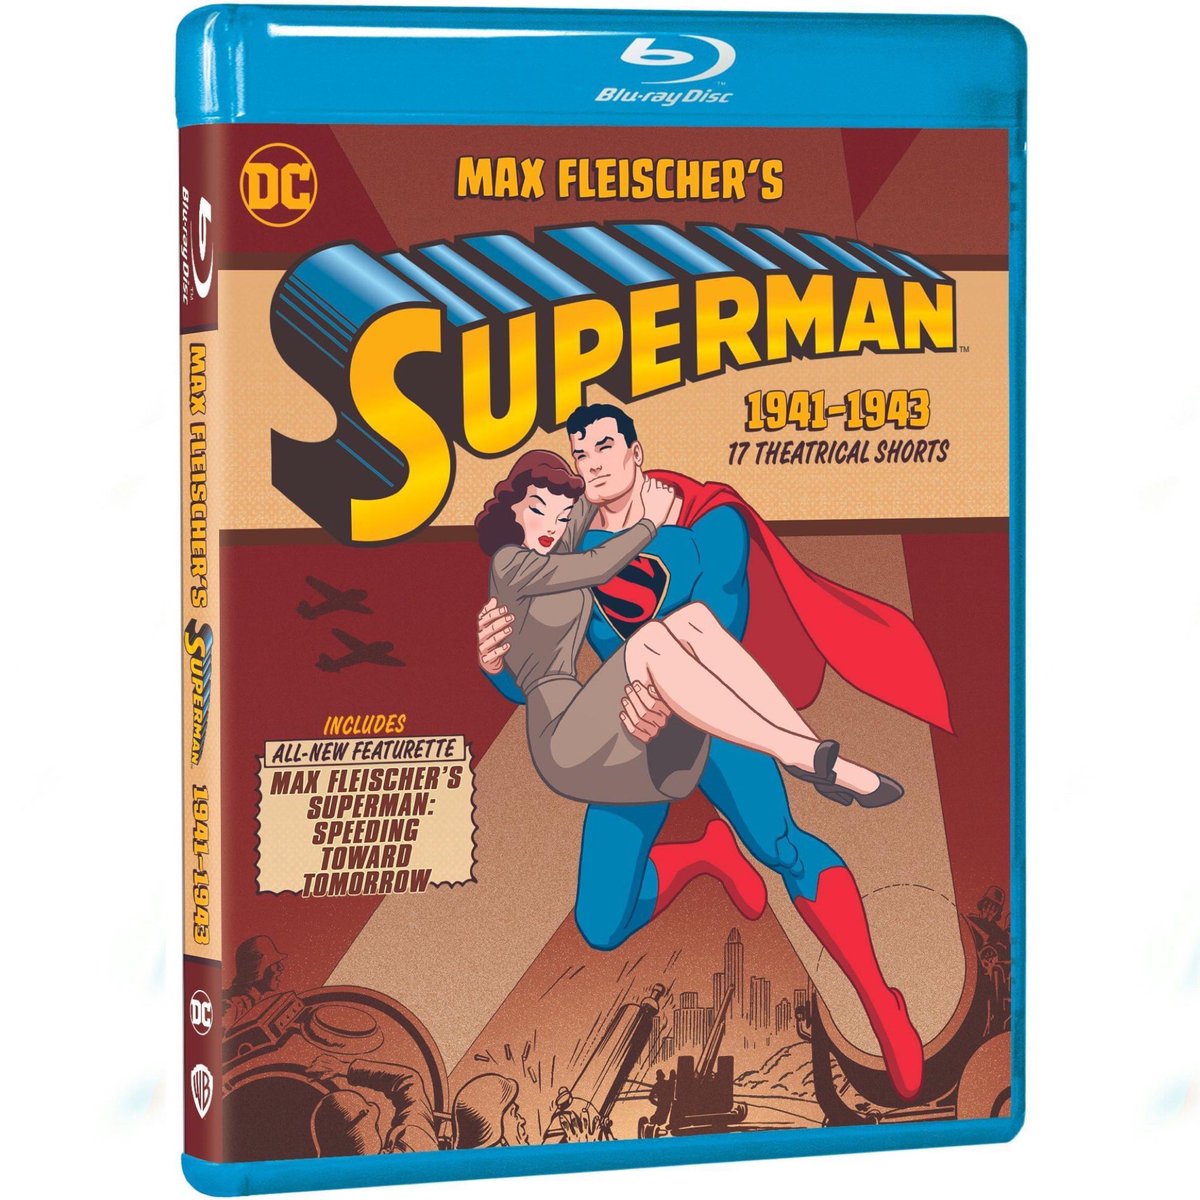 Warner Bros. is releasing all 17 of Max Fleischer’s ‘SUPERMAN’ theatrical shorts on blu-ray on May 16. 

The shorts were remastered from new 4K scans of the original 35mm negatives.